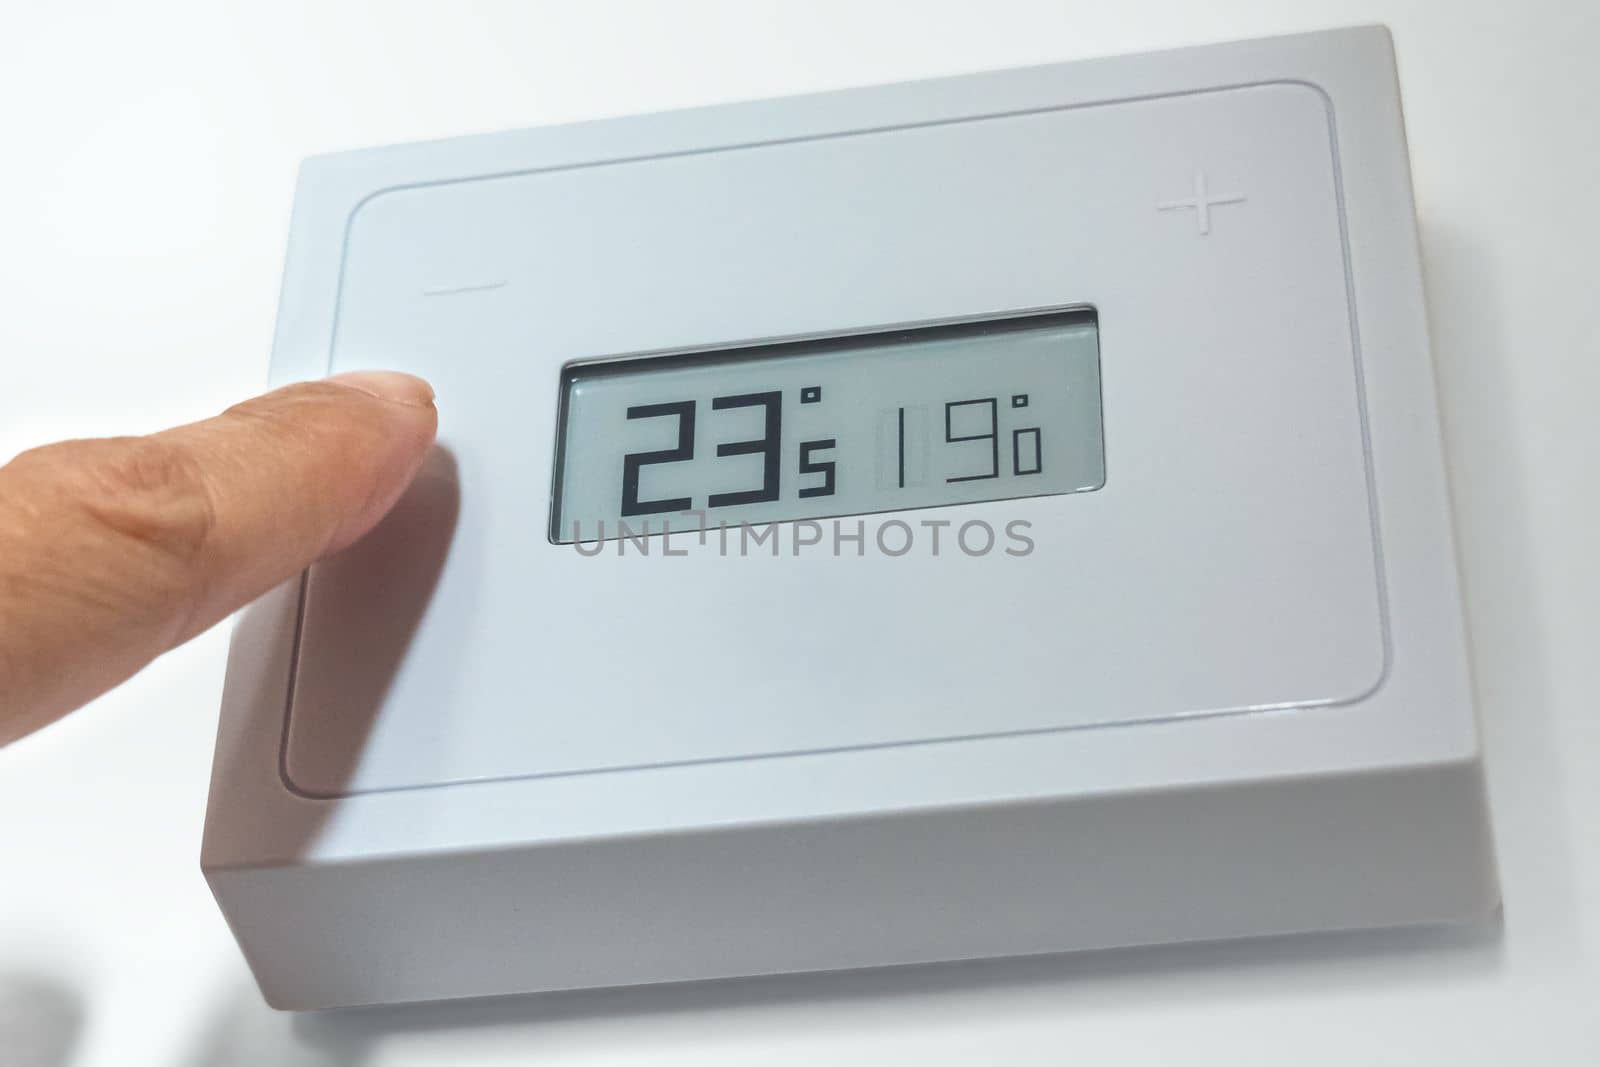 Lowering the temperature of a home thermostat due to energy crisis. by maramade